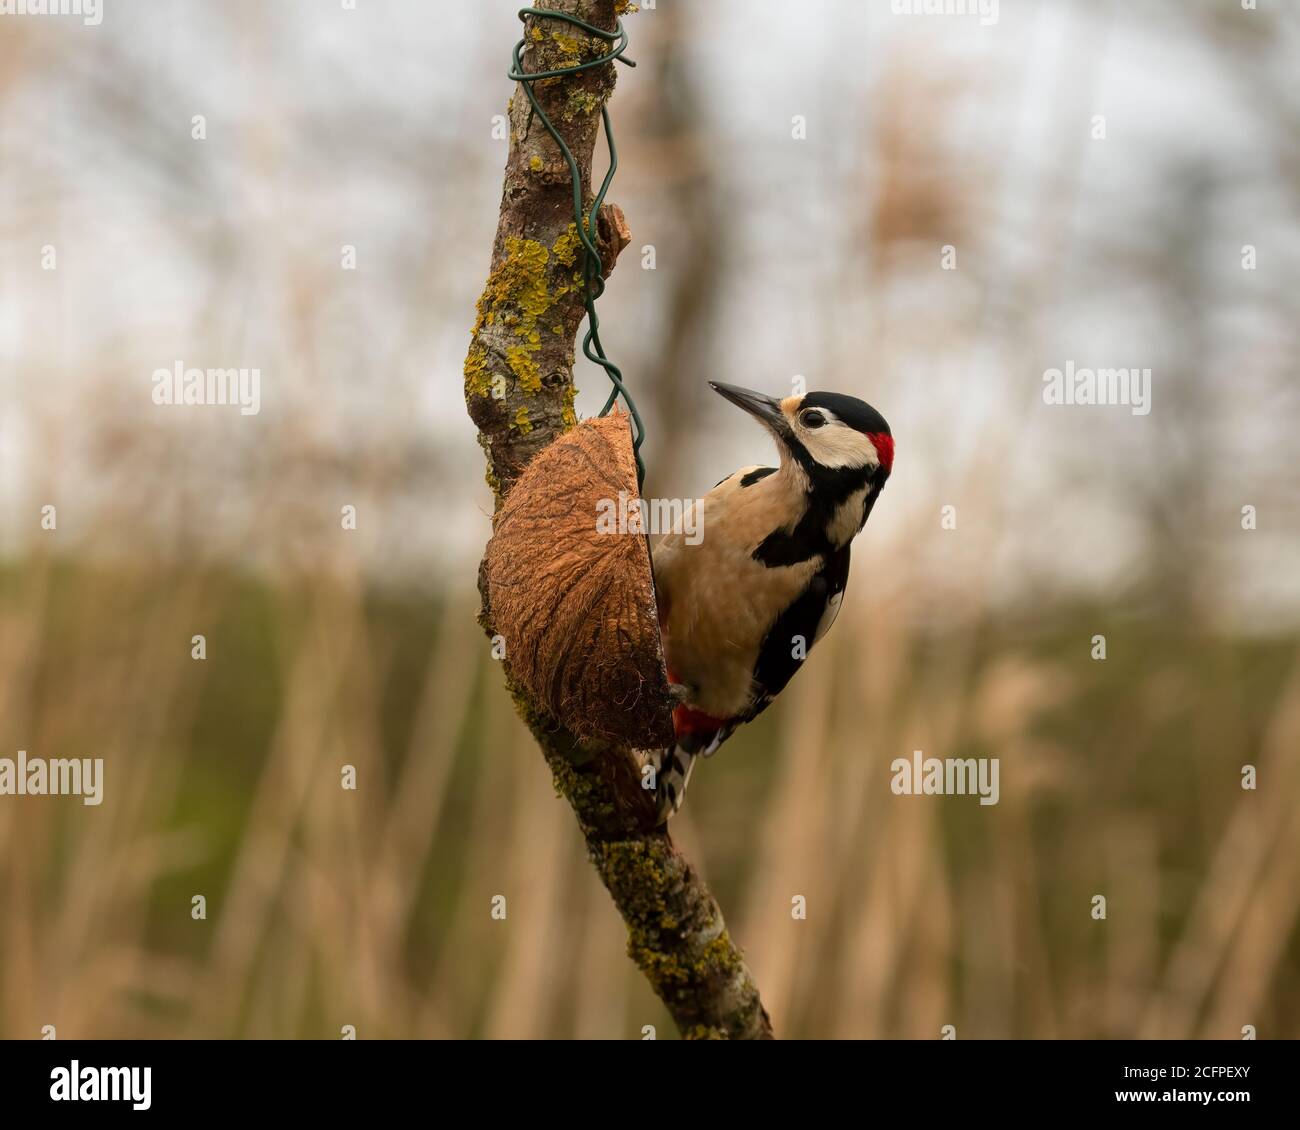 Great Spotted Woodpecker, Dendrocopos major, balancing from a coconut bird feeder Stock Photo